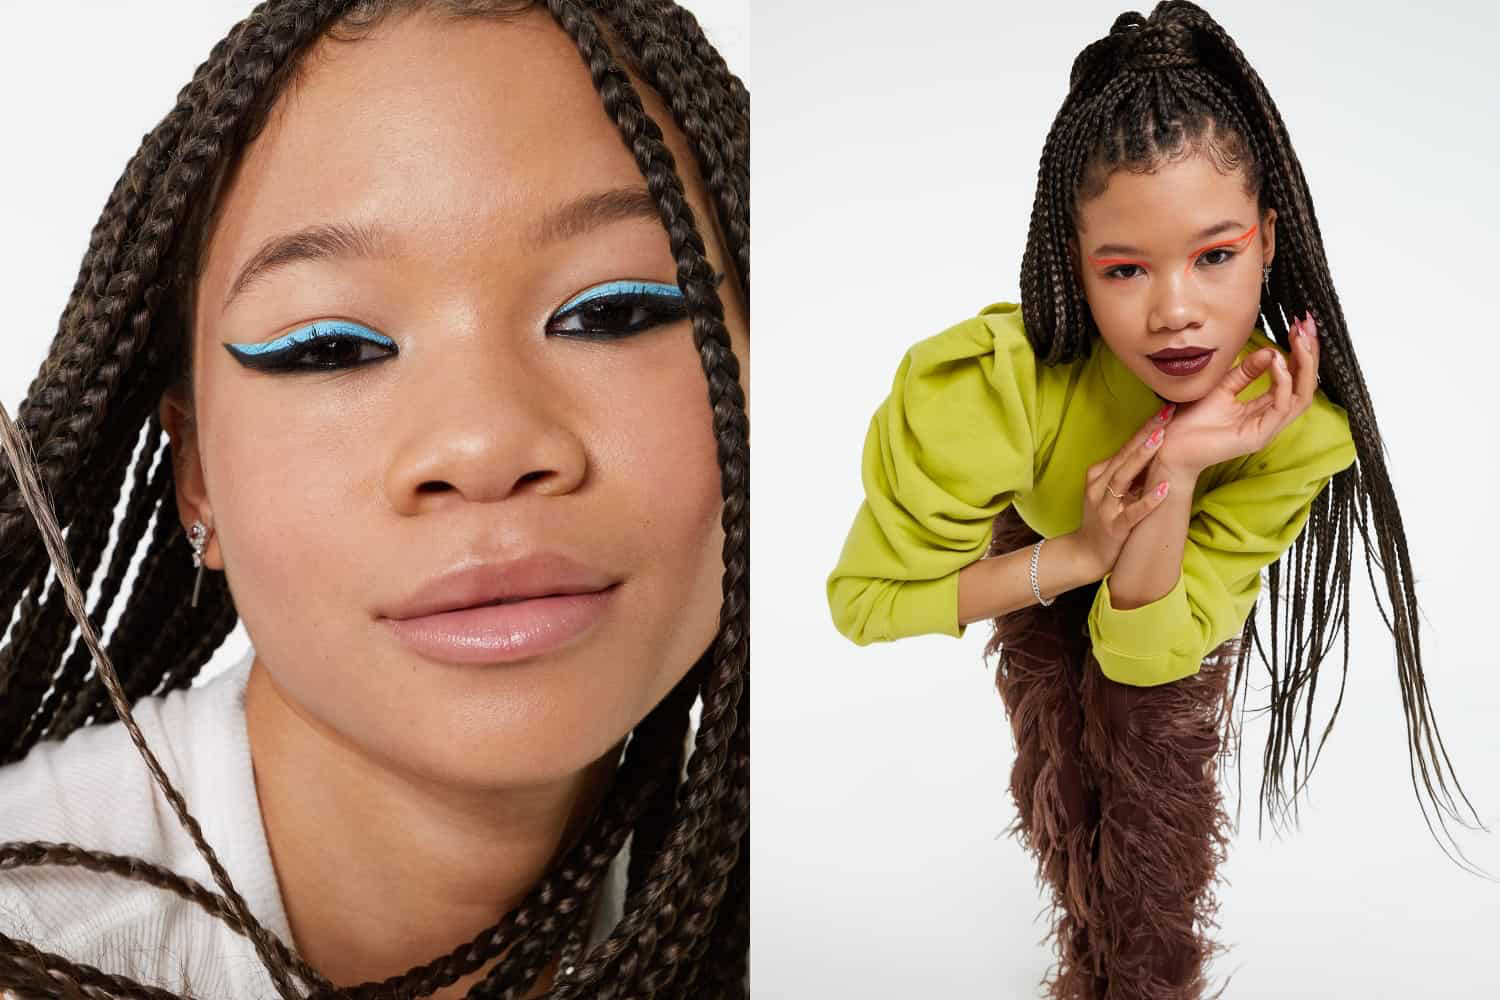 Storm Reid is the New Face of Maybelline